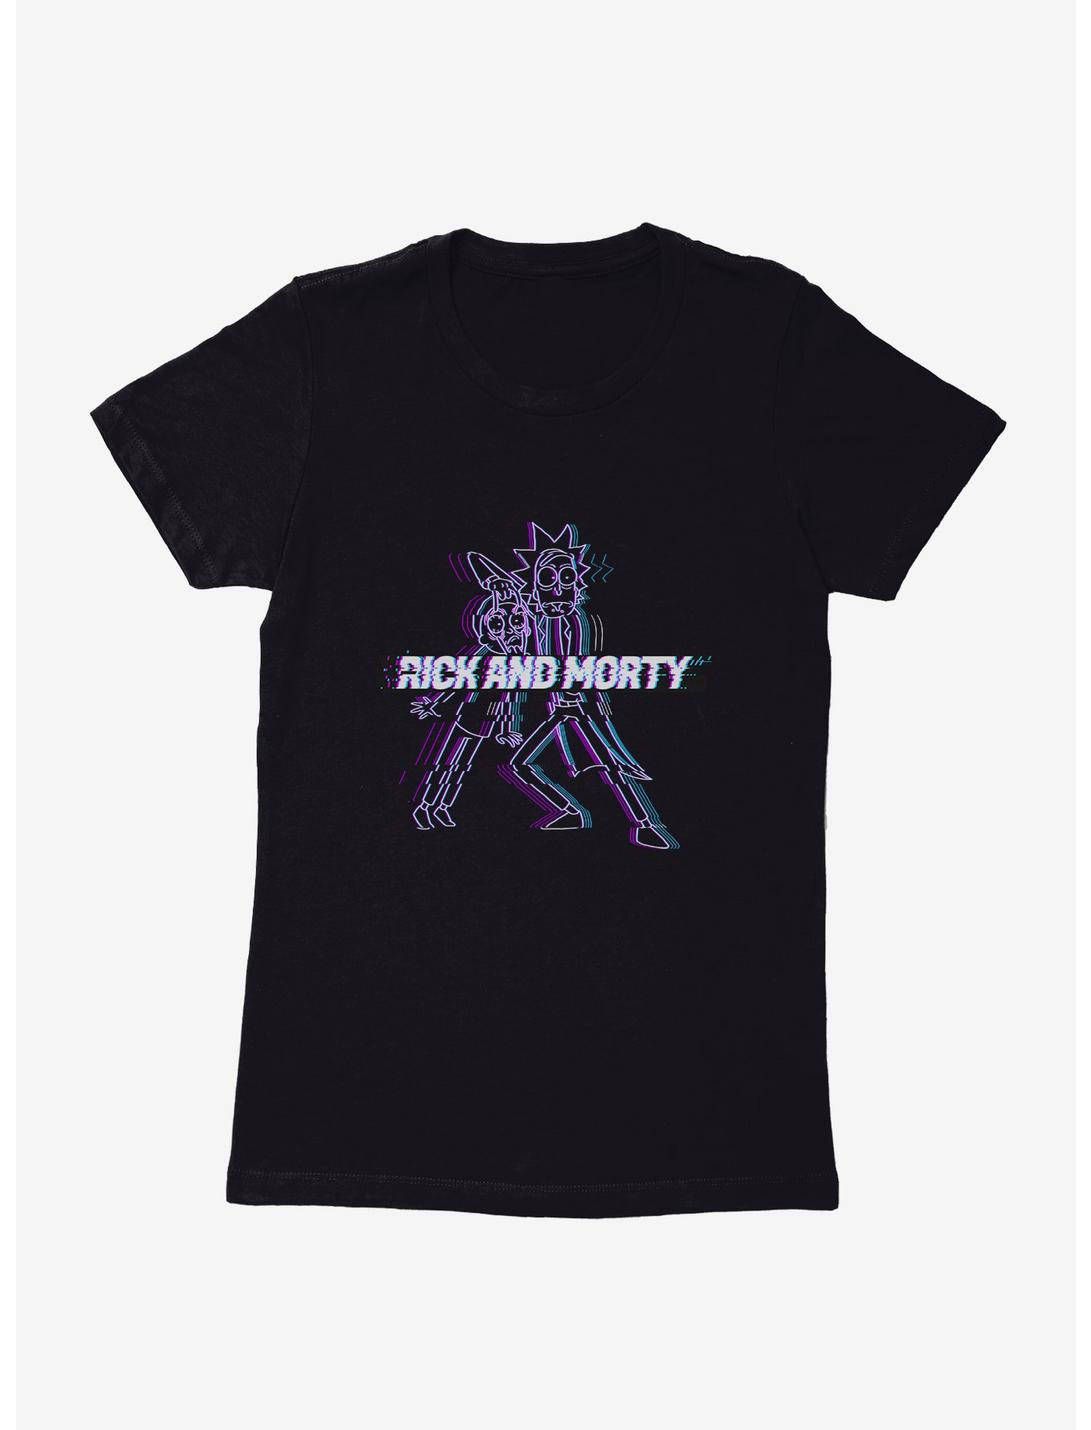 Plus Size Rick And Morty Glitching Text Womens T-Shirt, , hi-res